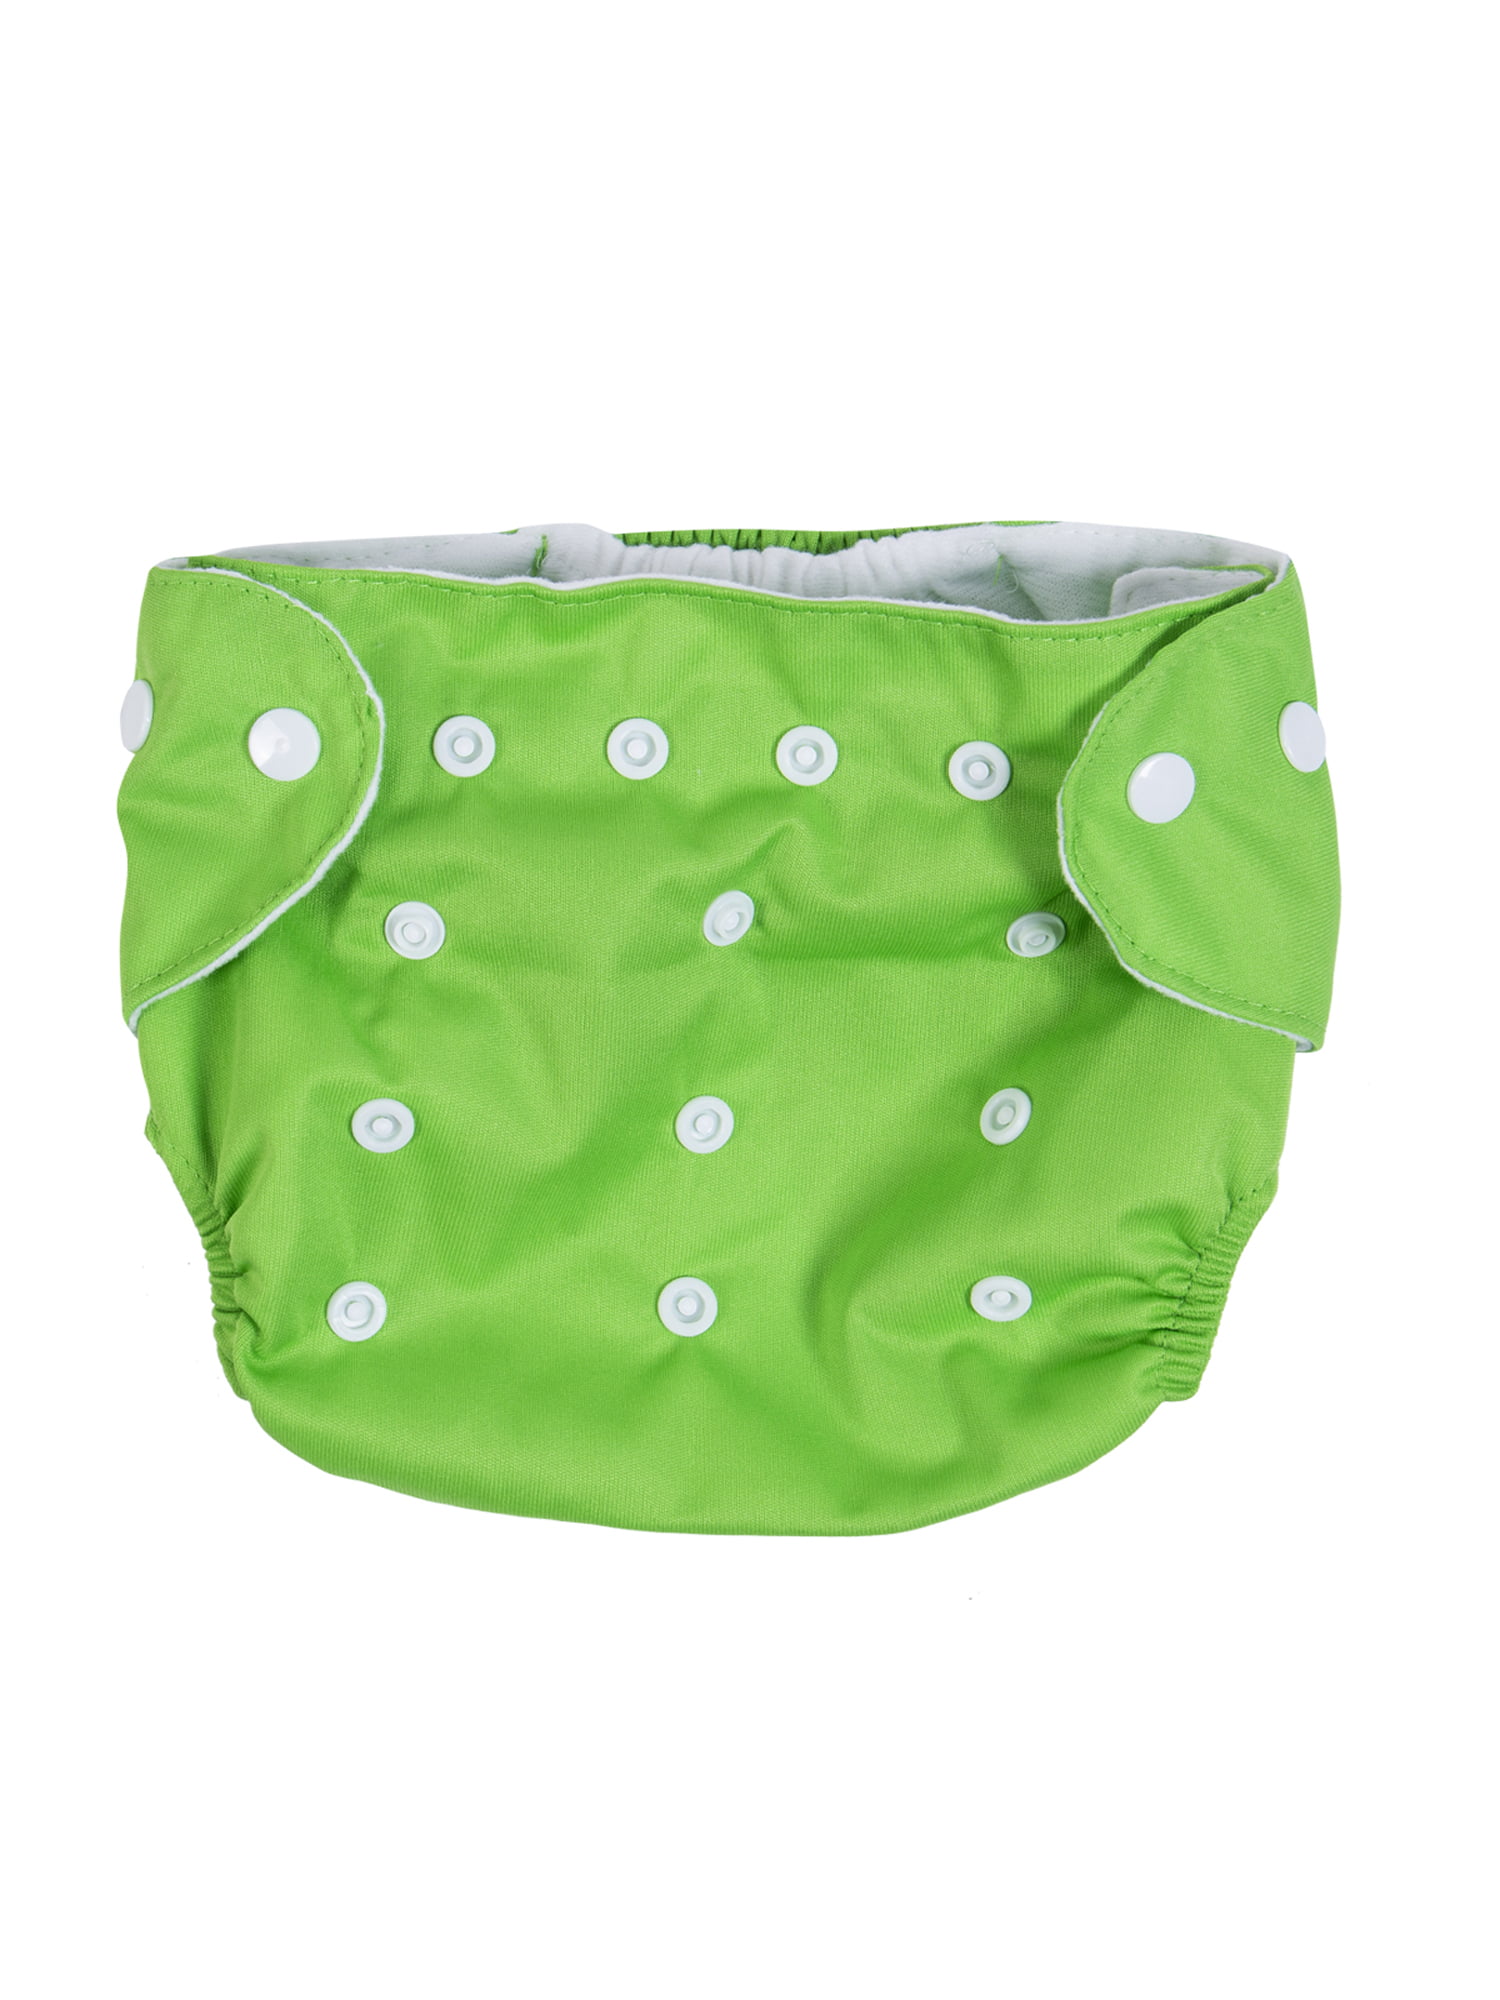 Adjustable Washable Infants Baby Pocket Nappy Cloth Reusable Diaper Cover Wrap 